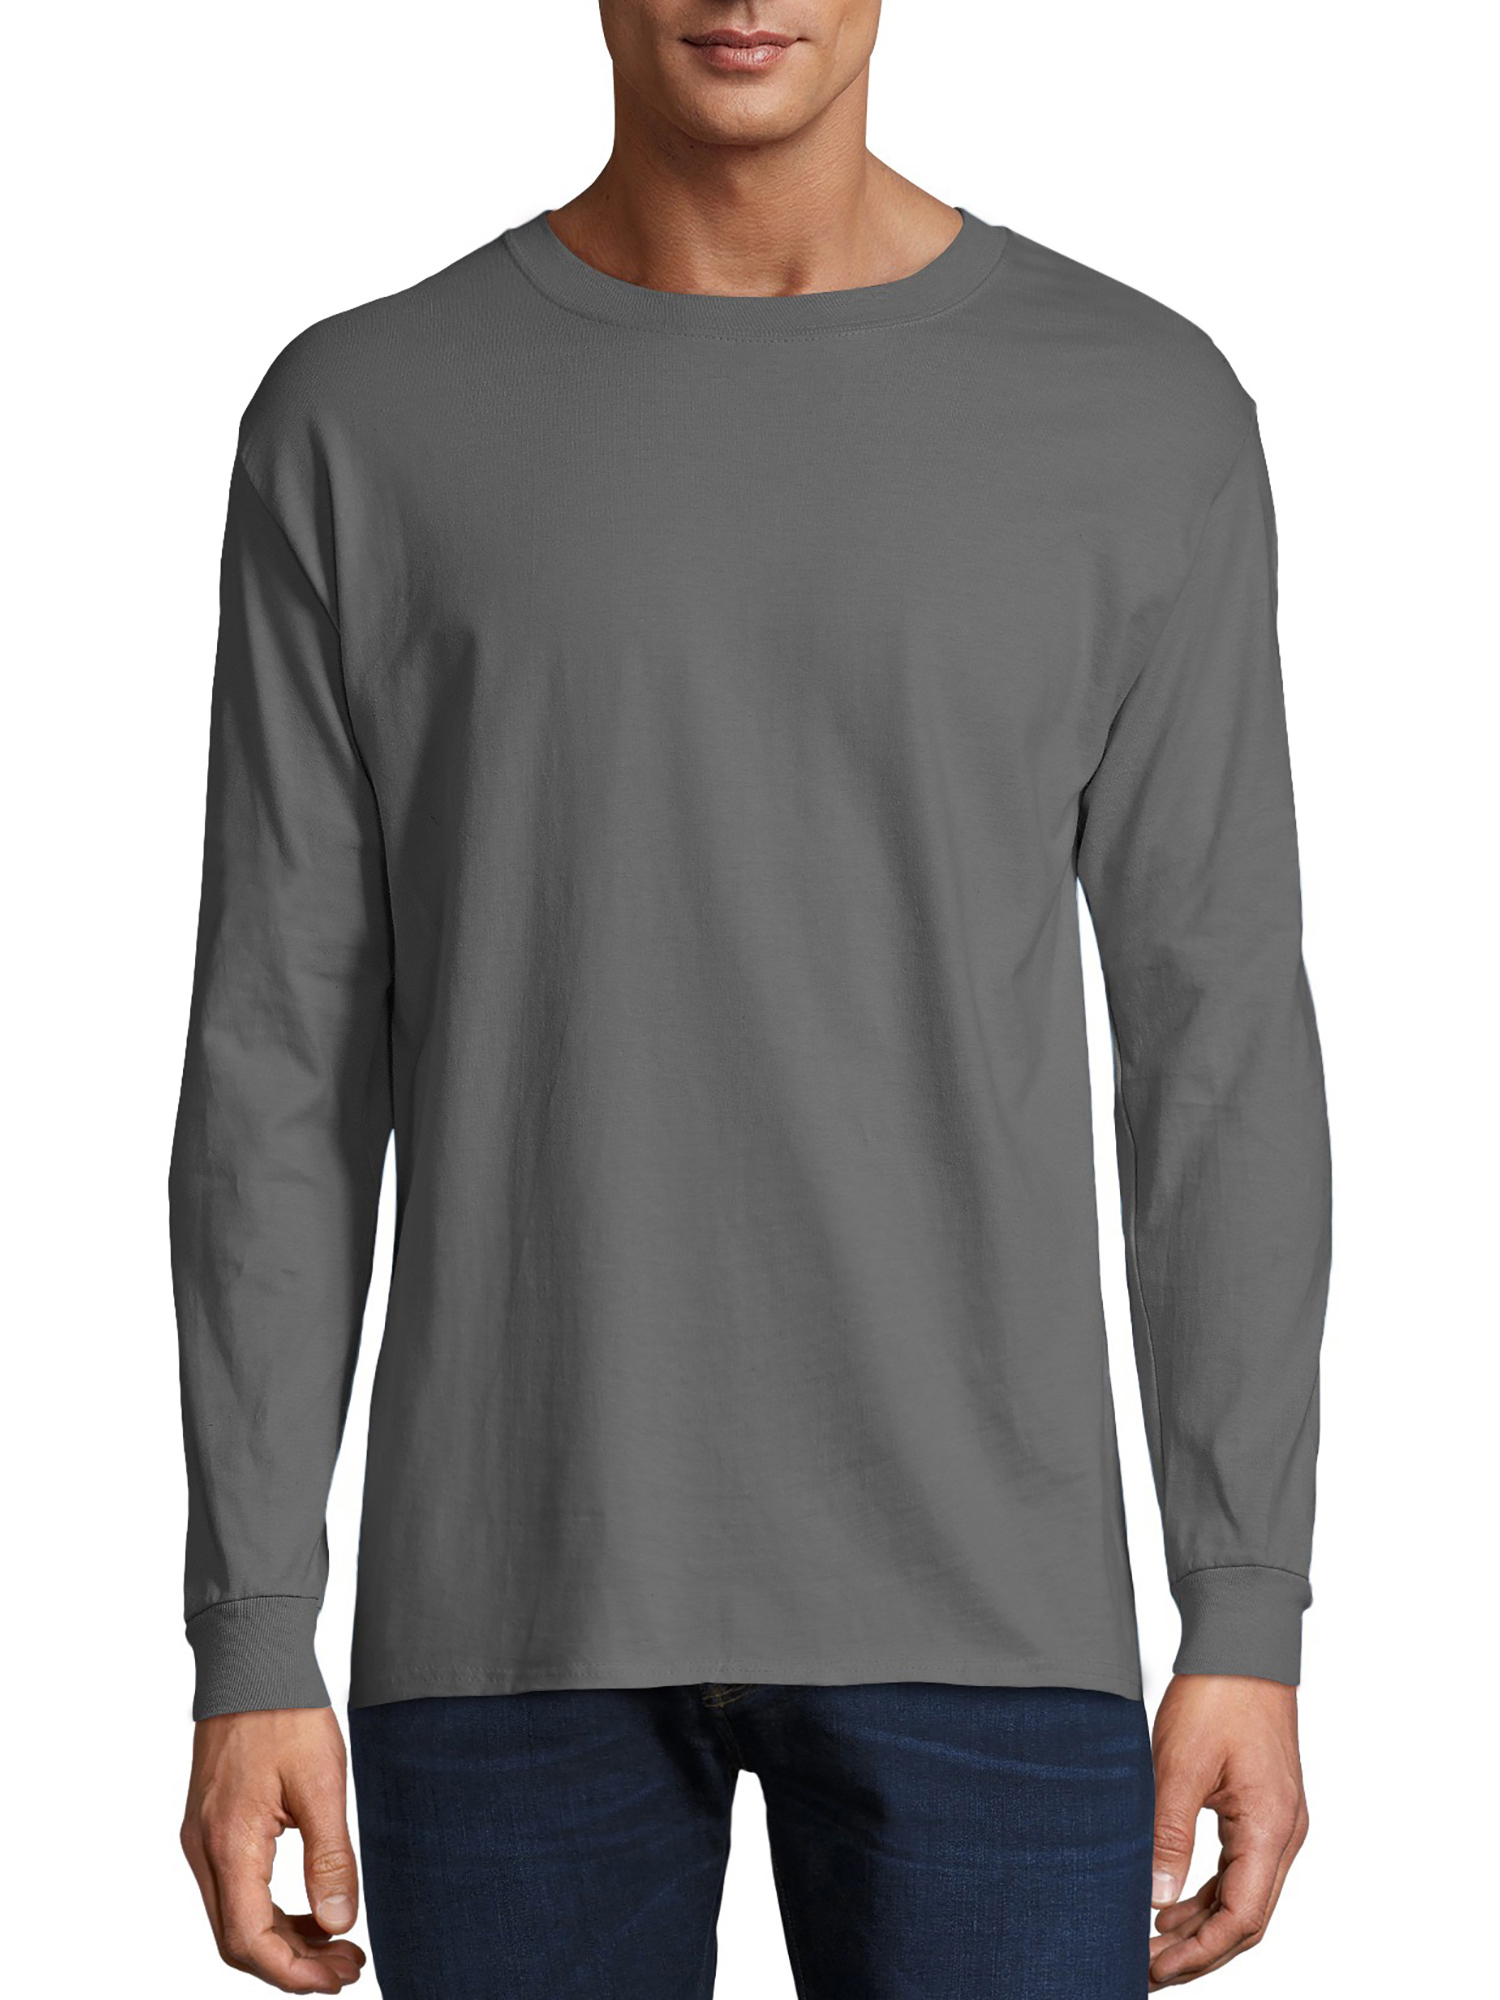 Hanes Men's and Big Men's Premium Beefy-T Long Sleeve T-Shirt, Up To 3XL - image 1 of 3